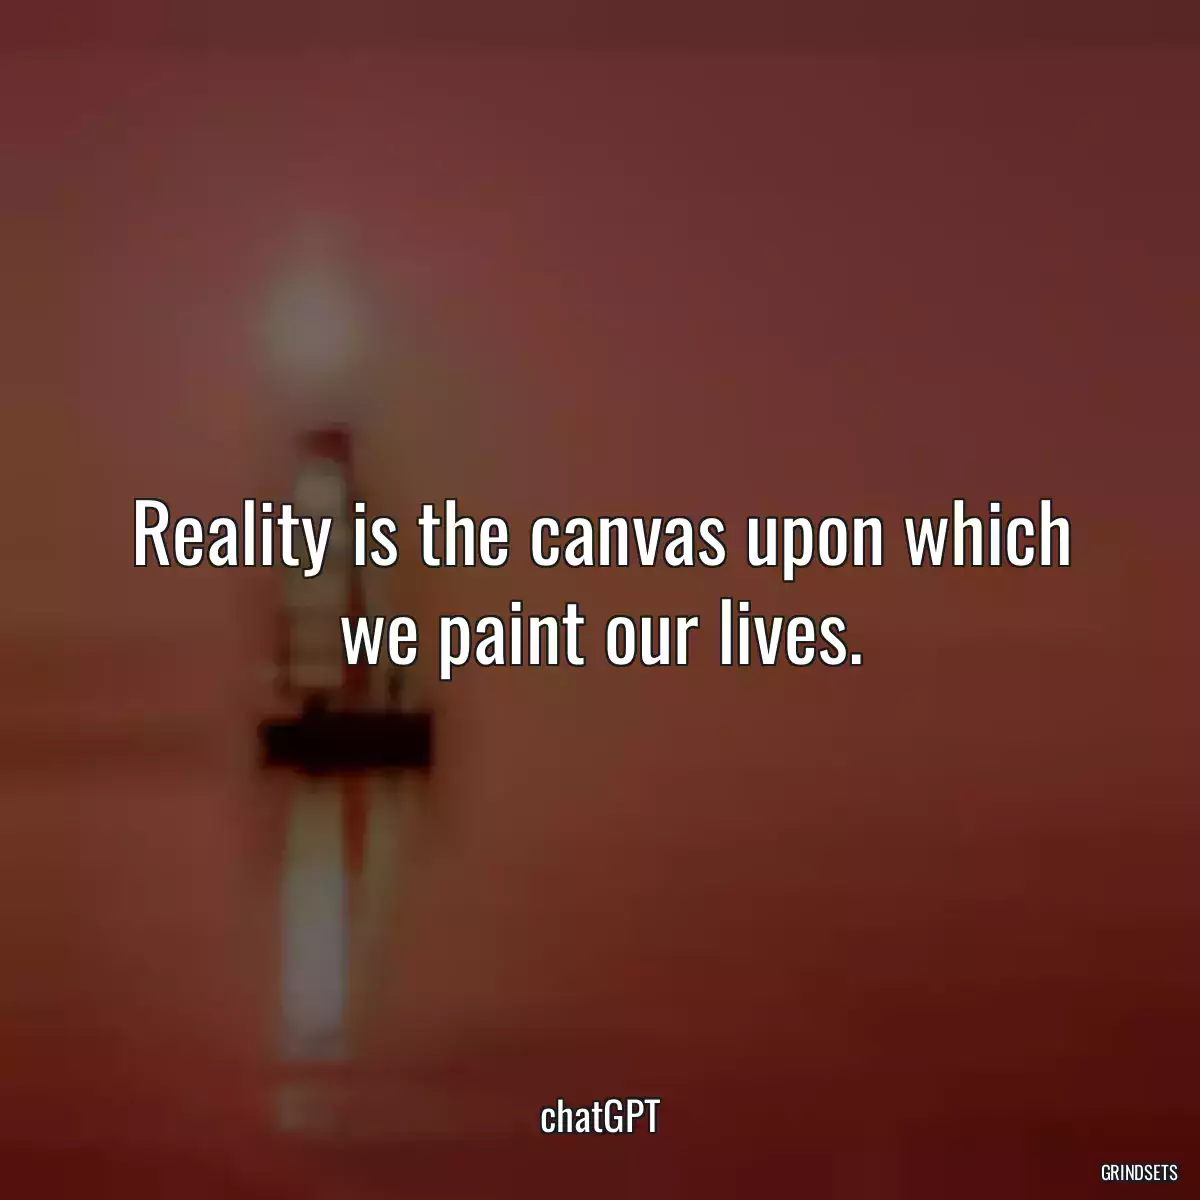 Reality is the canvas upon which we paint our lives.